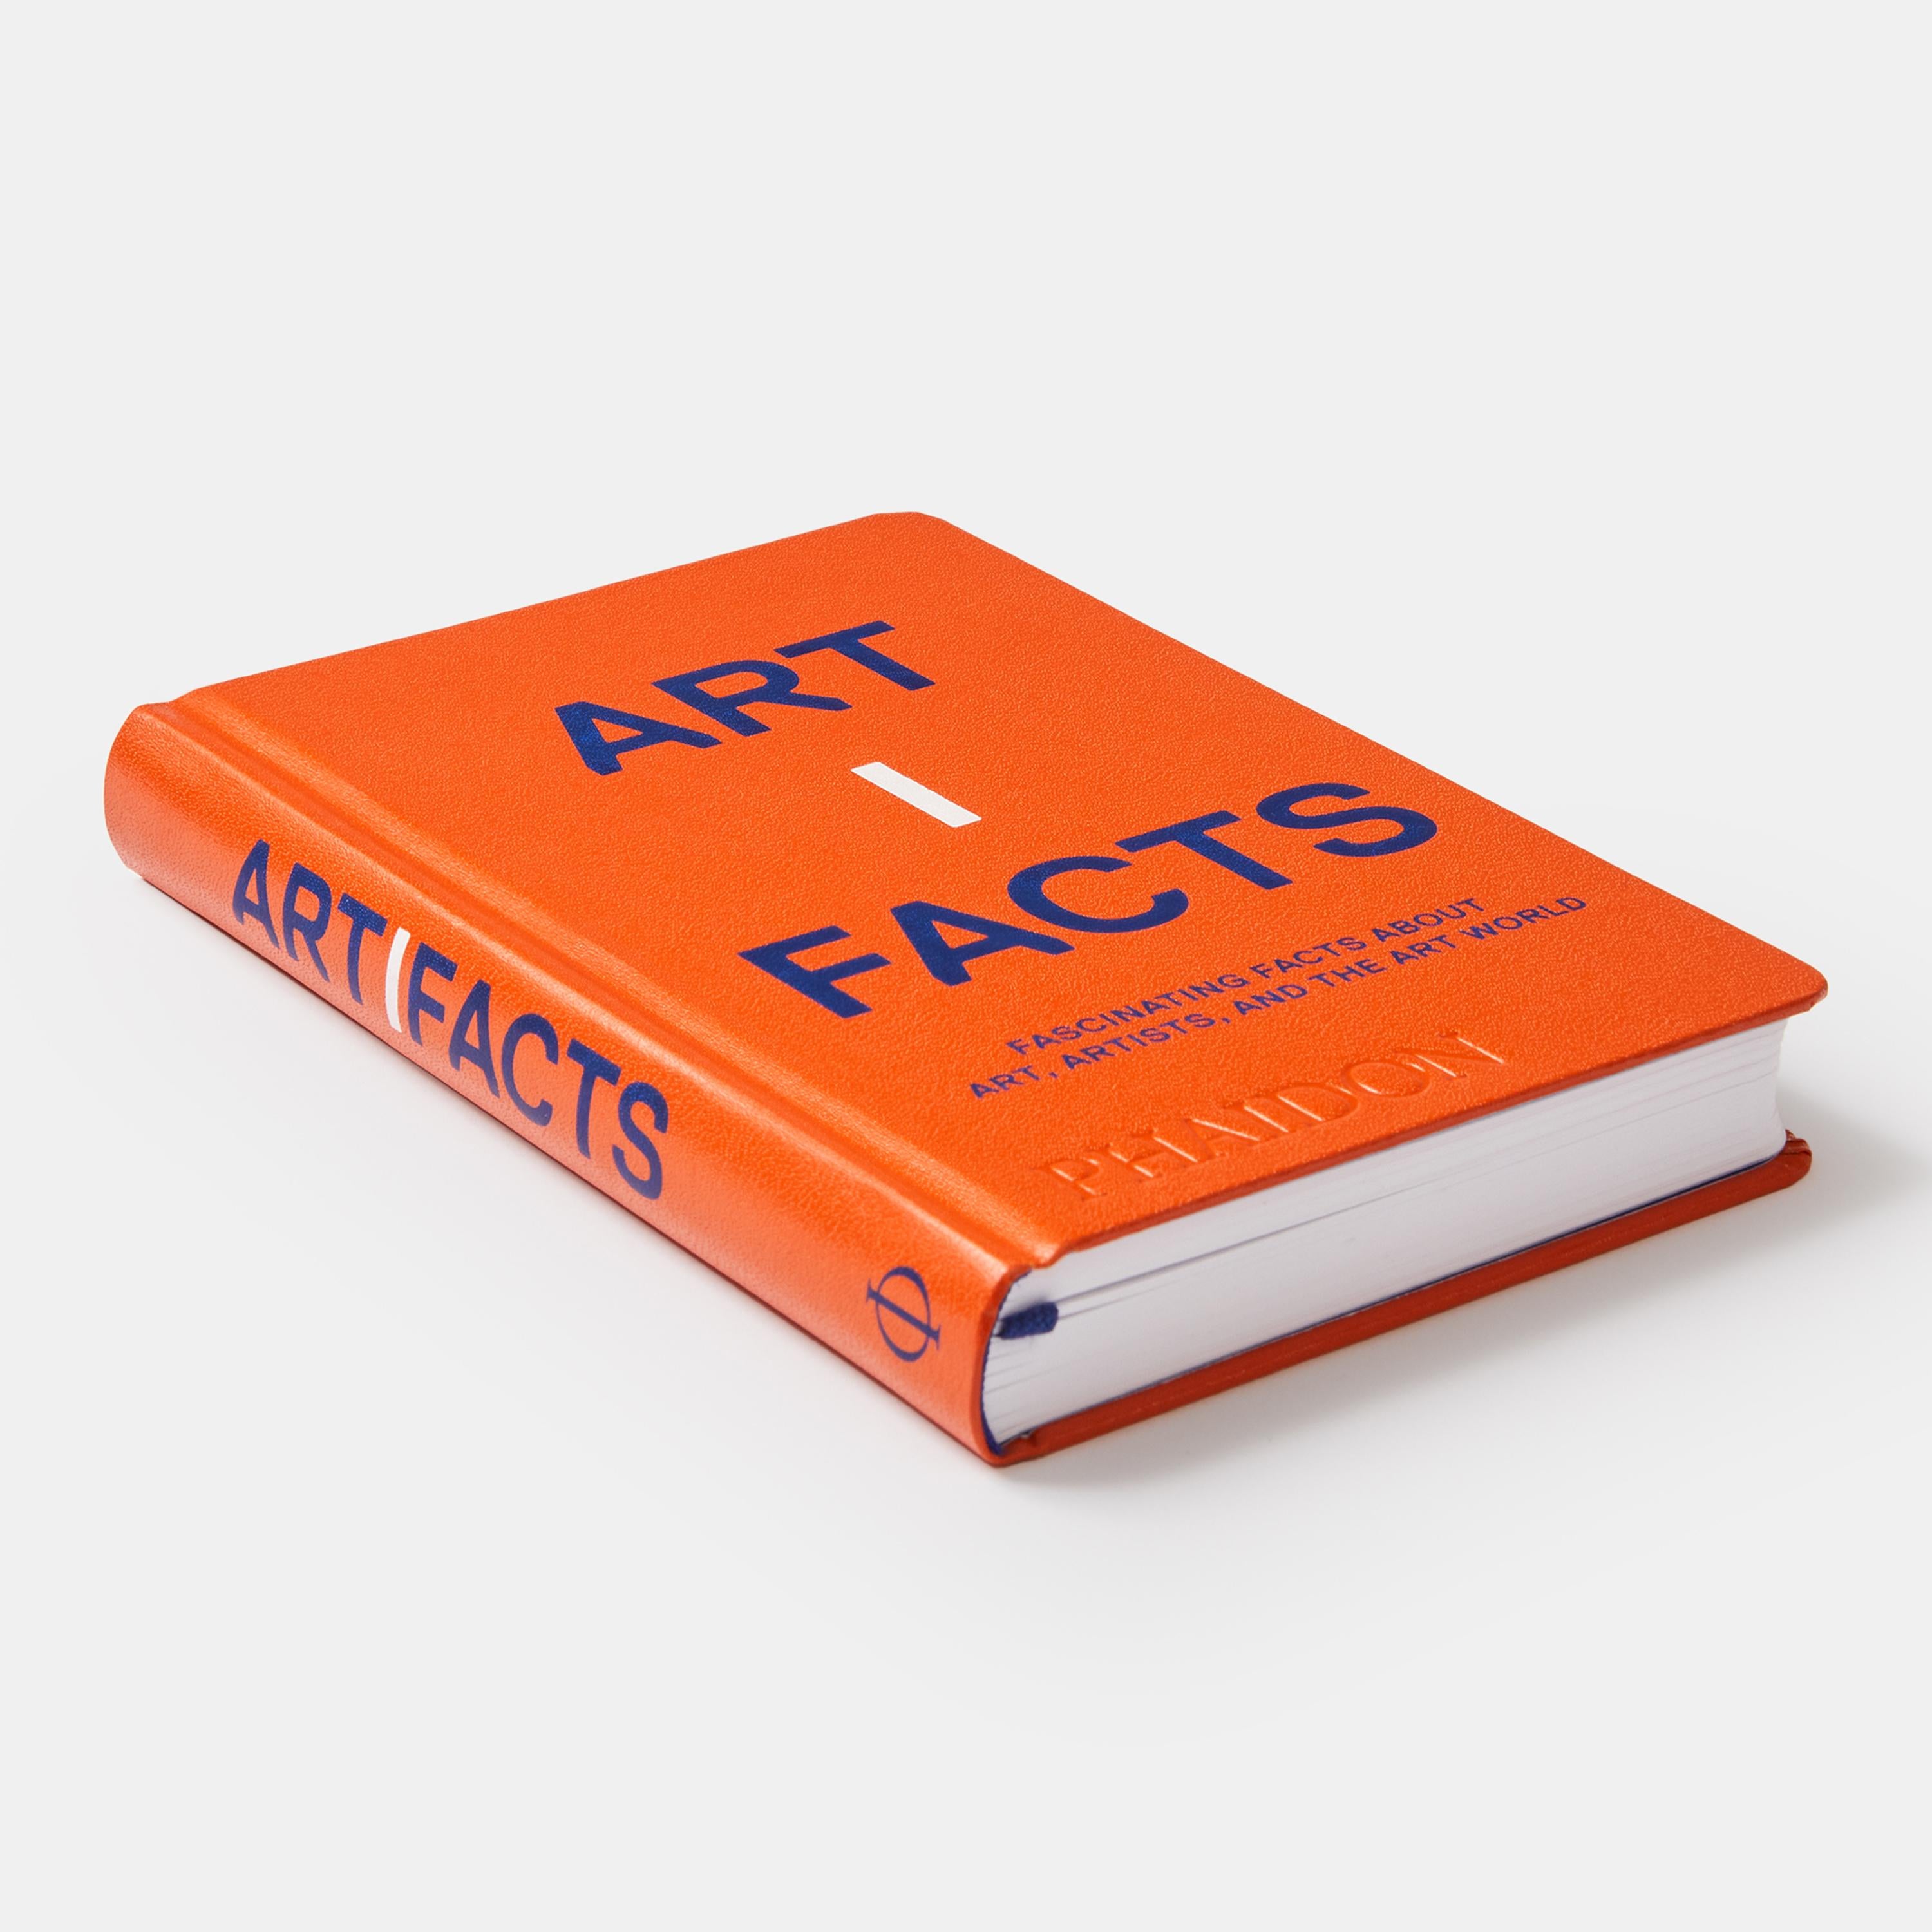 Artifacts: Fascinating Facts about Art, Artists, and the Art World 5